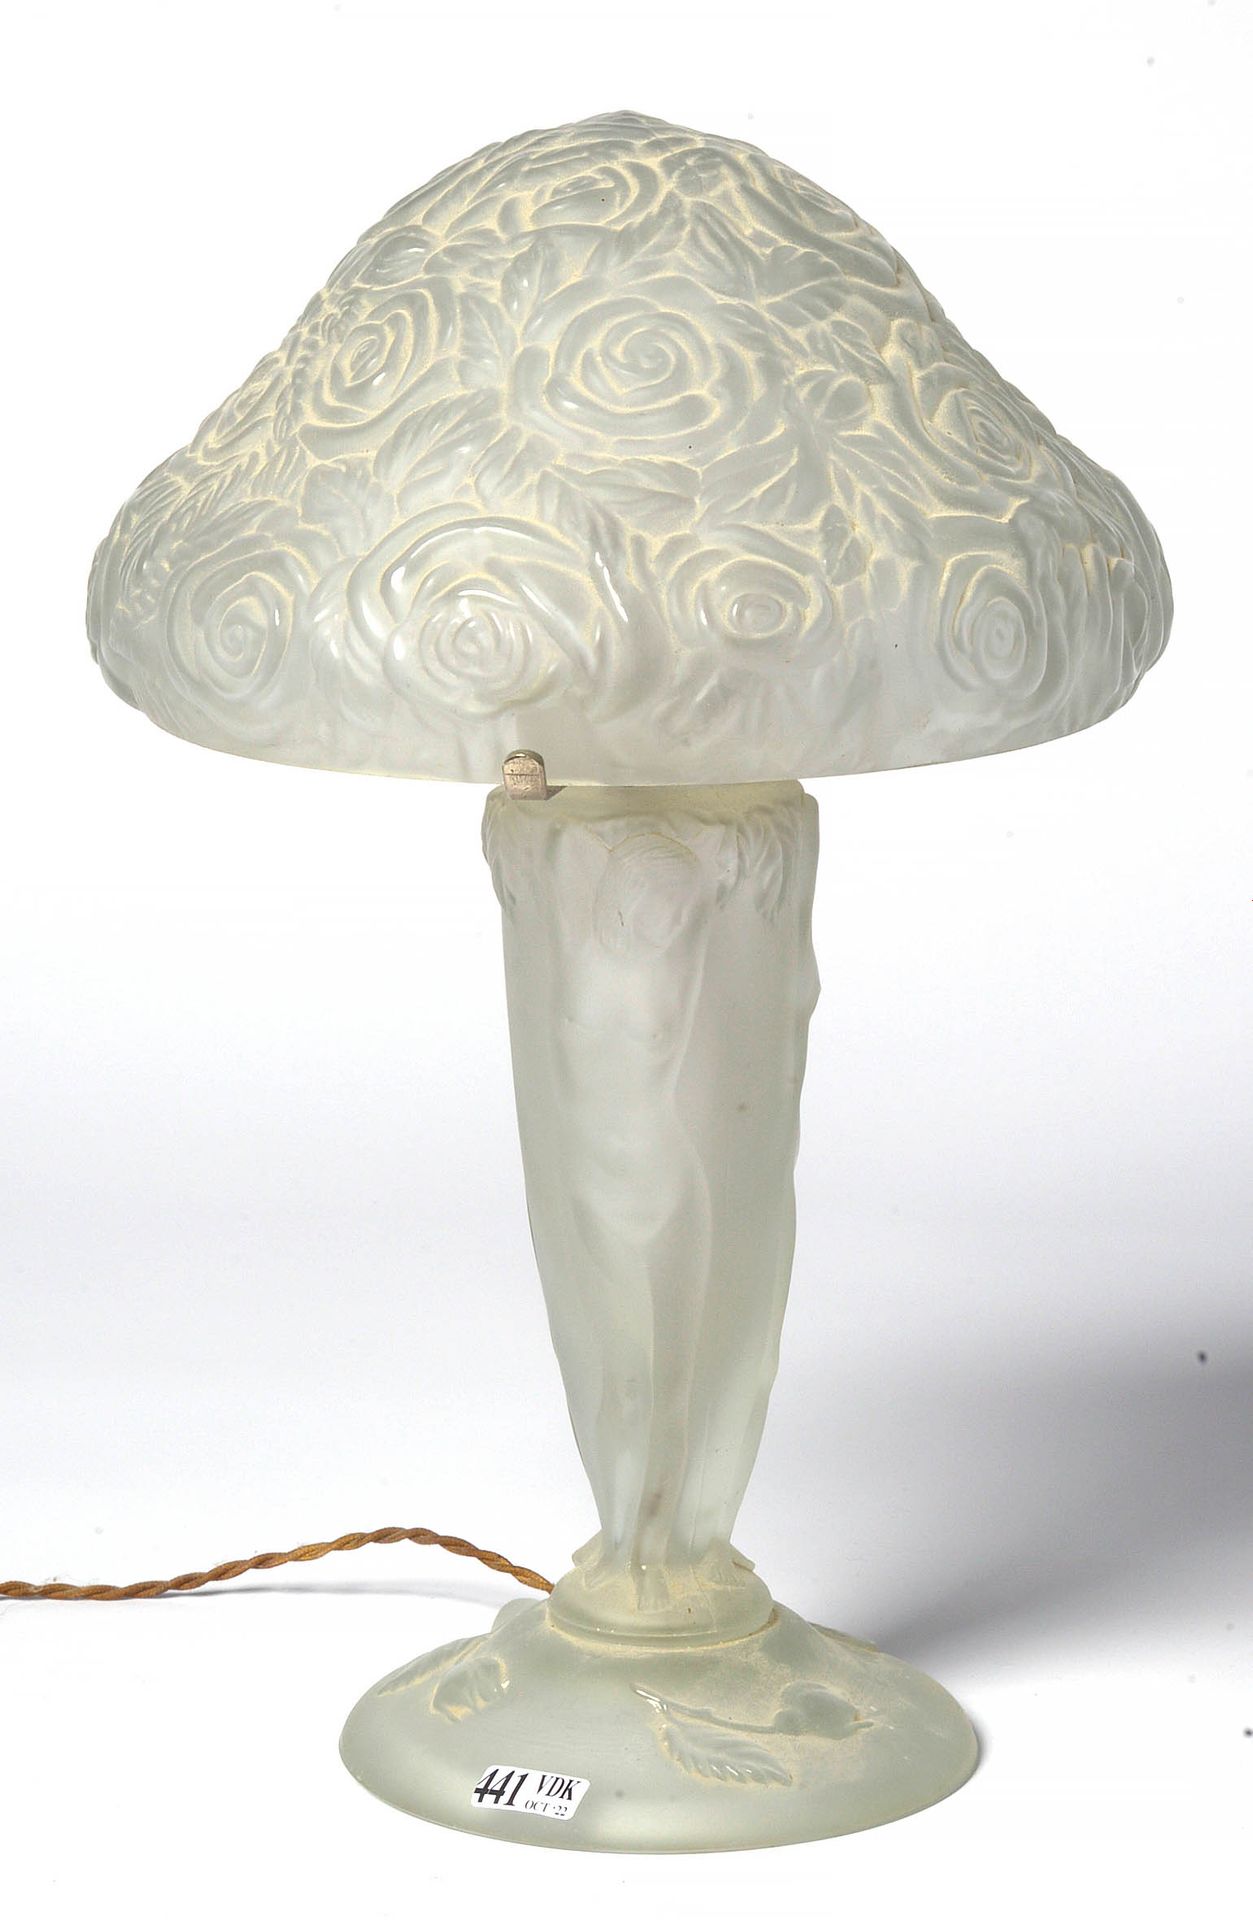 MULLER FRERES (1897 - 1936) Lamp called "Mushroom" in frosted glass with the dec&hellip;